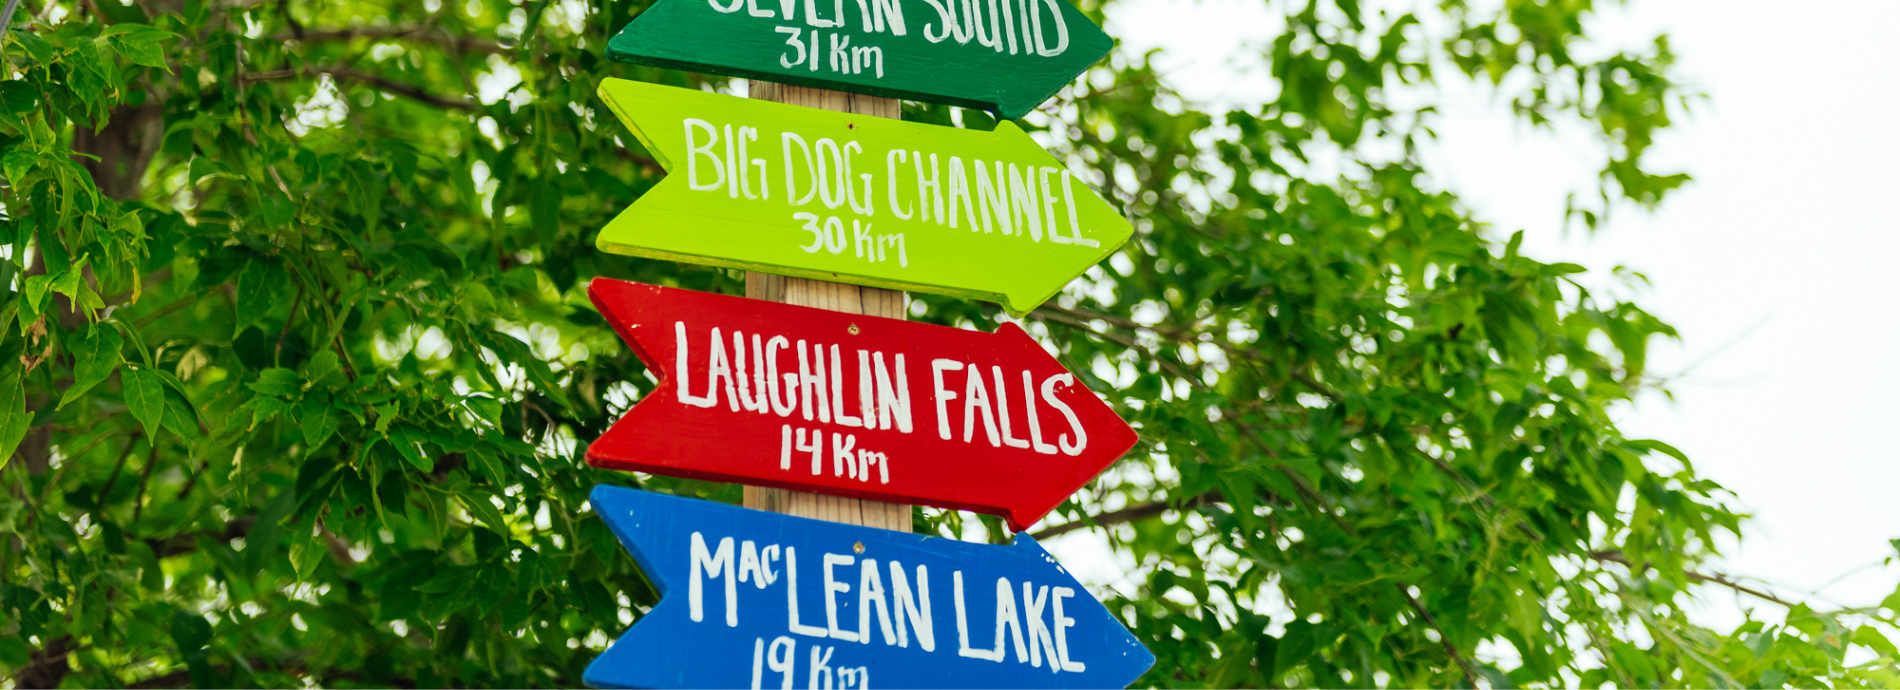 directional signage in vibrant colours